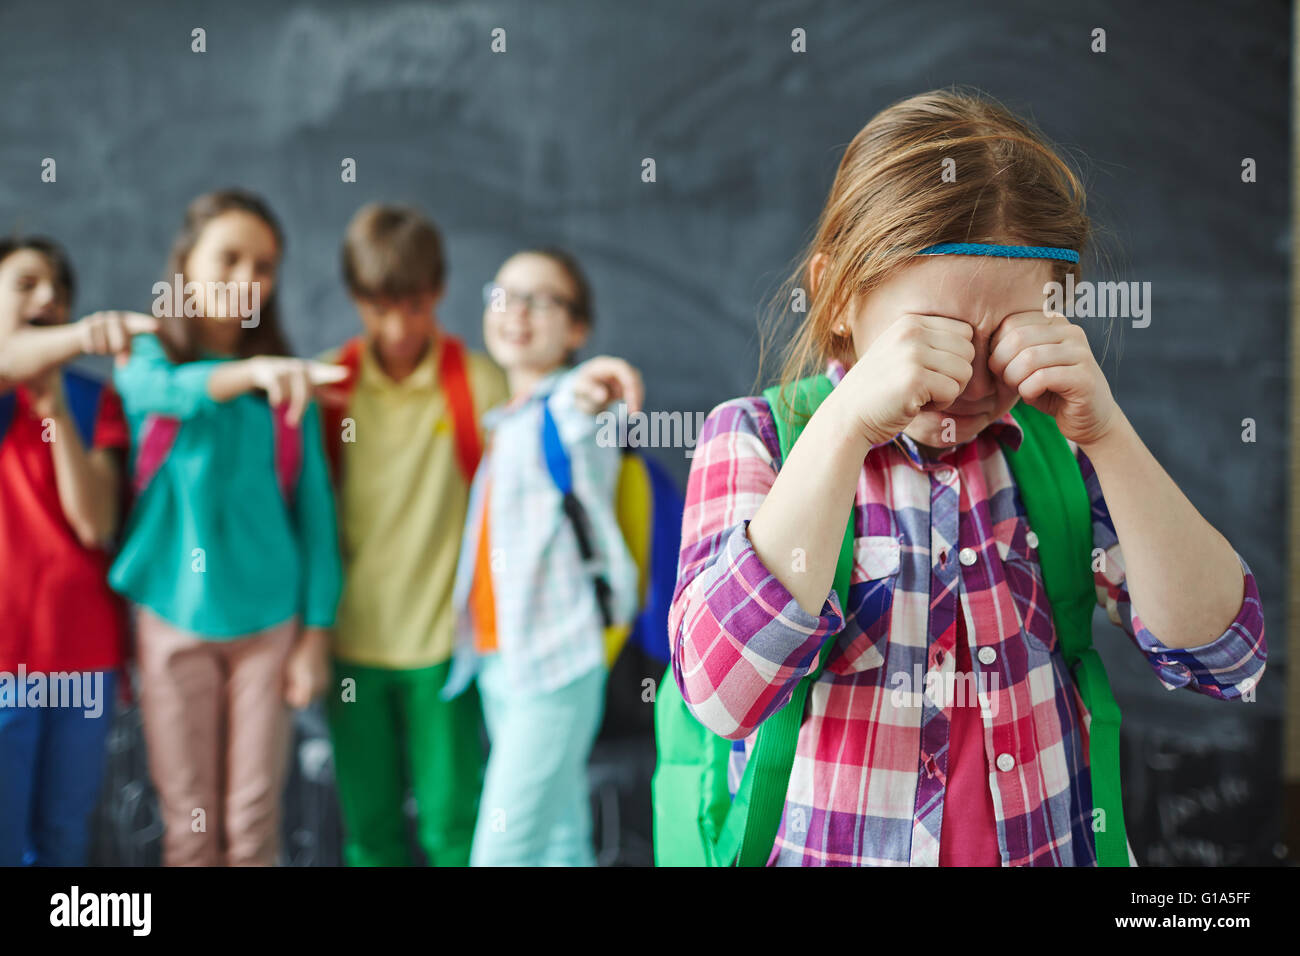 Schoolgirl crying while classmates teasing her on background Stock Photo